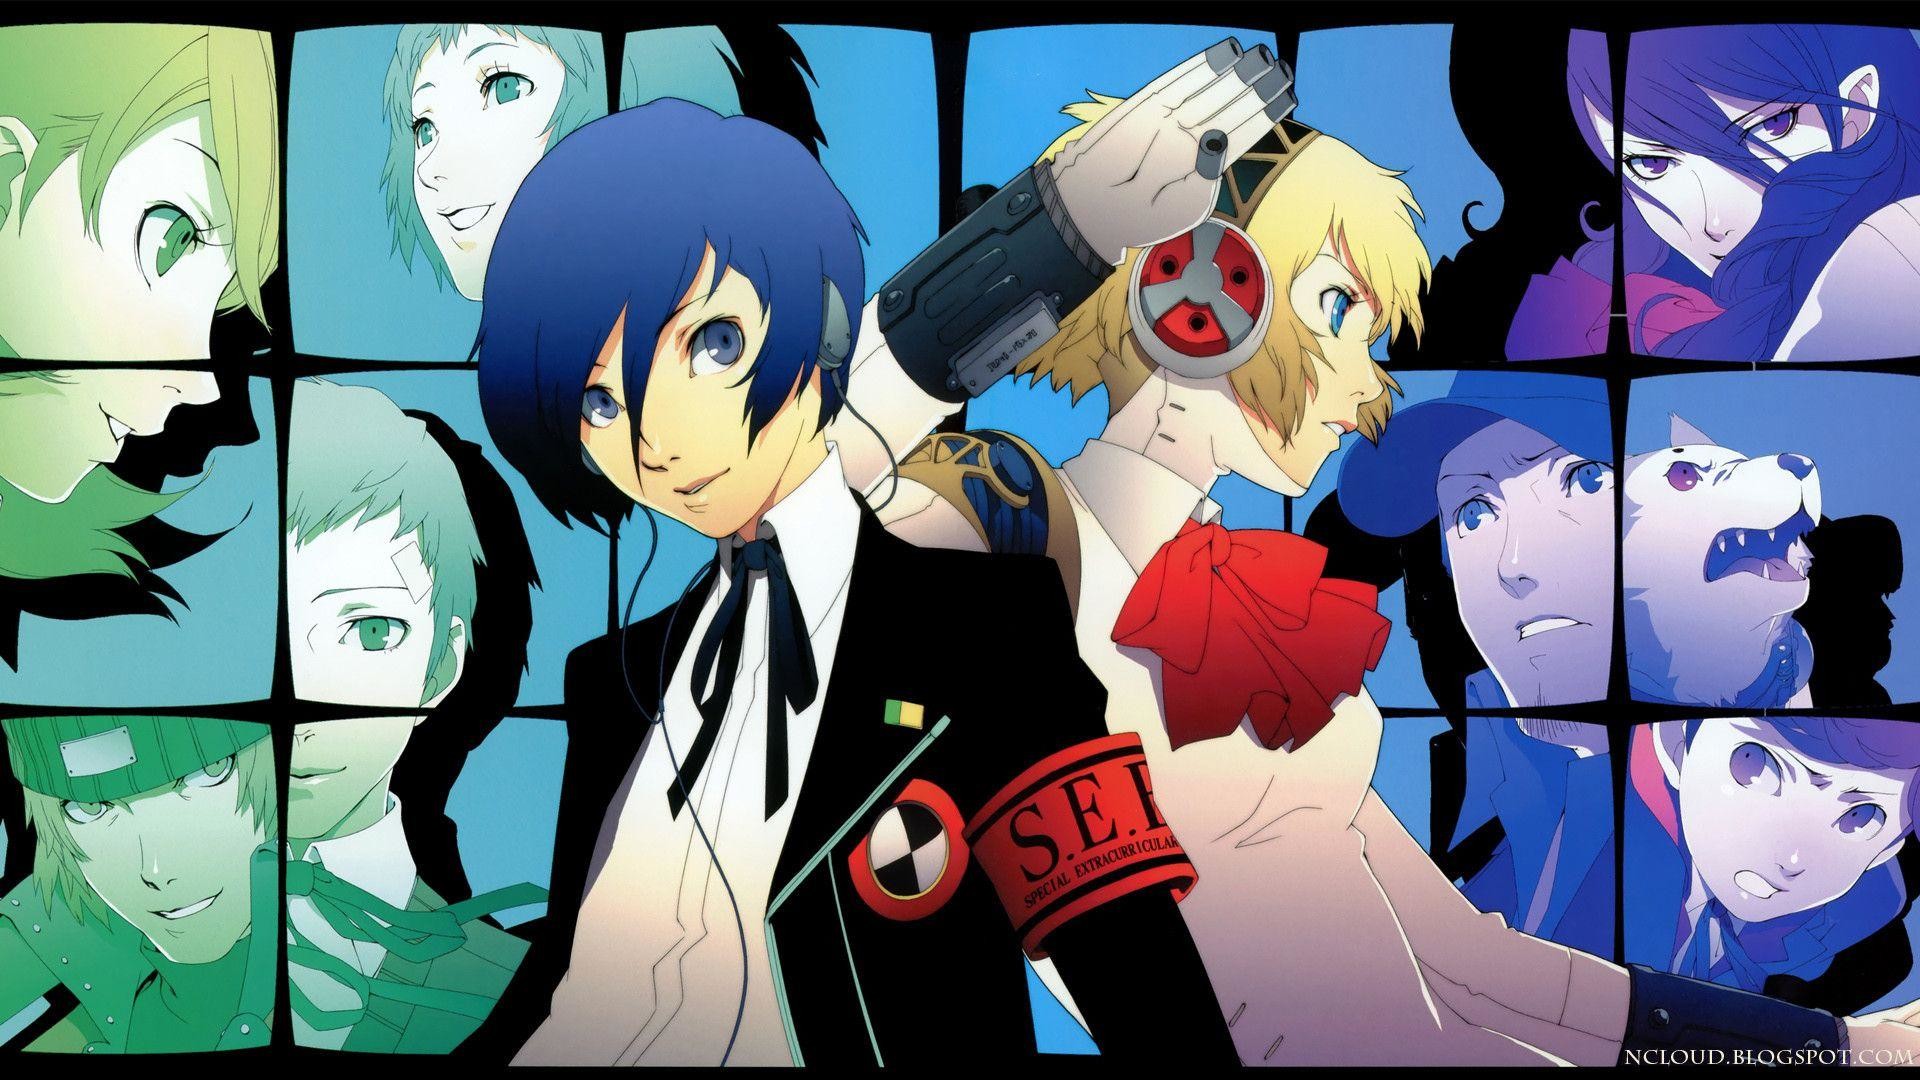 1920x1080 Games Movies Music Anime: Persona 3 FES coming to NA PSN (PS2 .